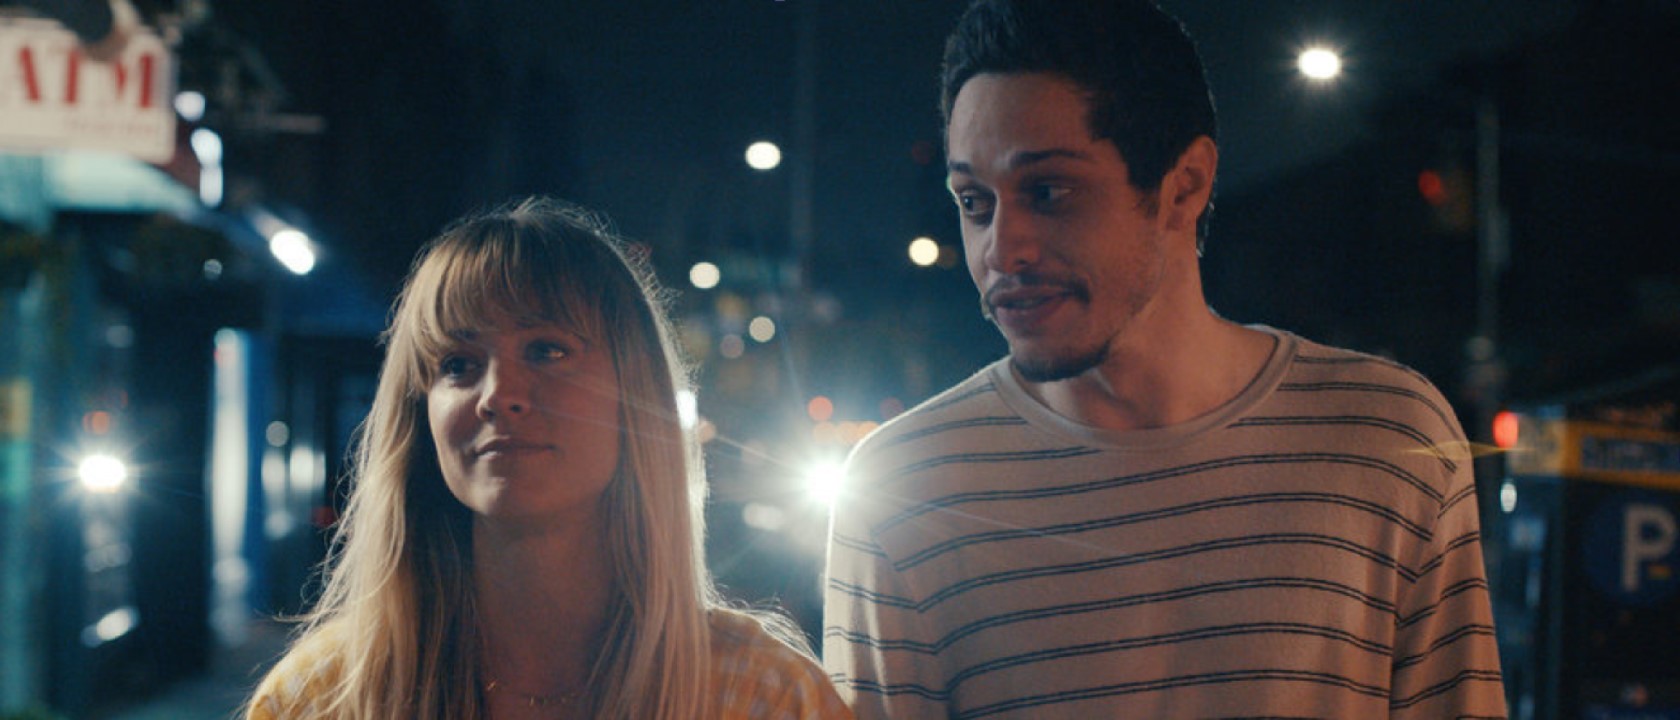 Peacock's Meet Cute Review: Kaley Cuoco And Pete Davidson's Fun Rom-Com Will Keep Viewers Thinking